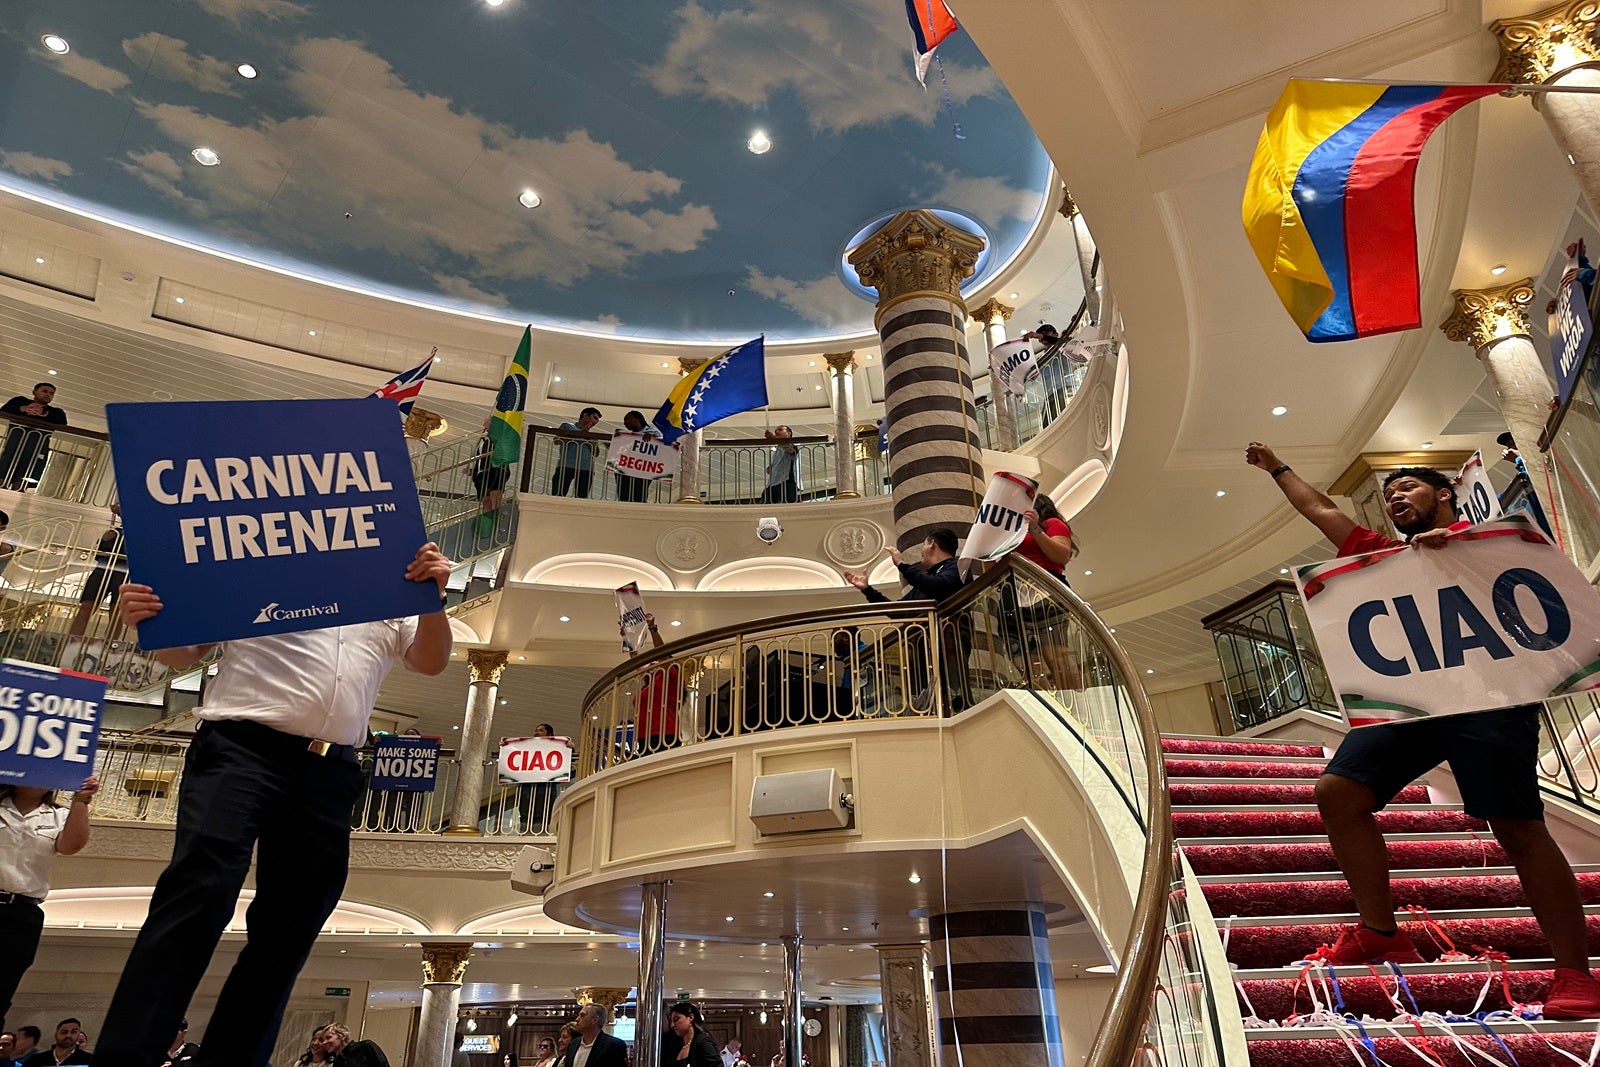 Crew members on a cruise ship wave flags and signs in the atrium to welcome passengrs on board